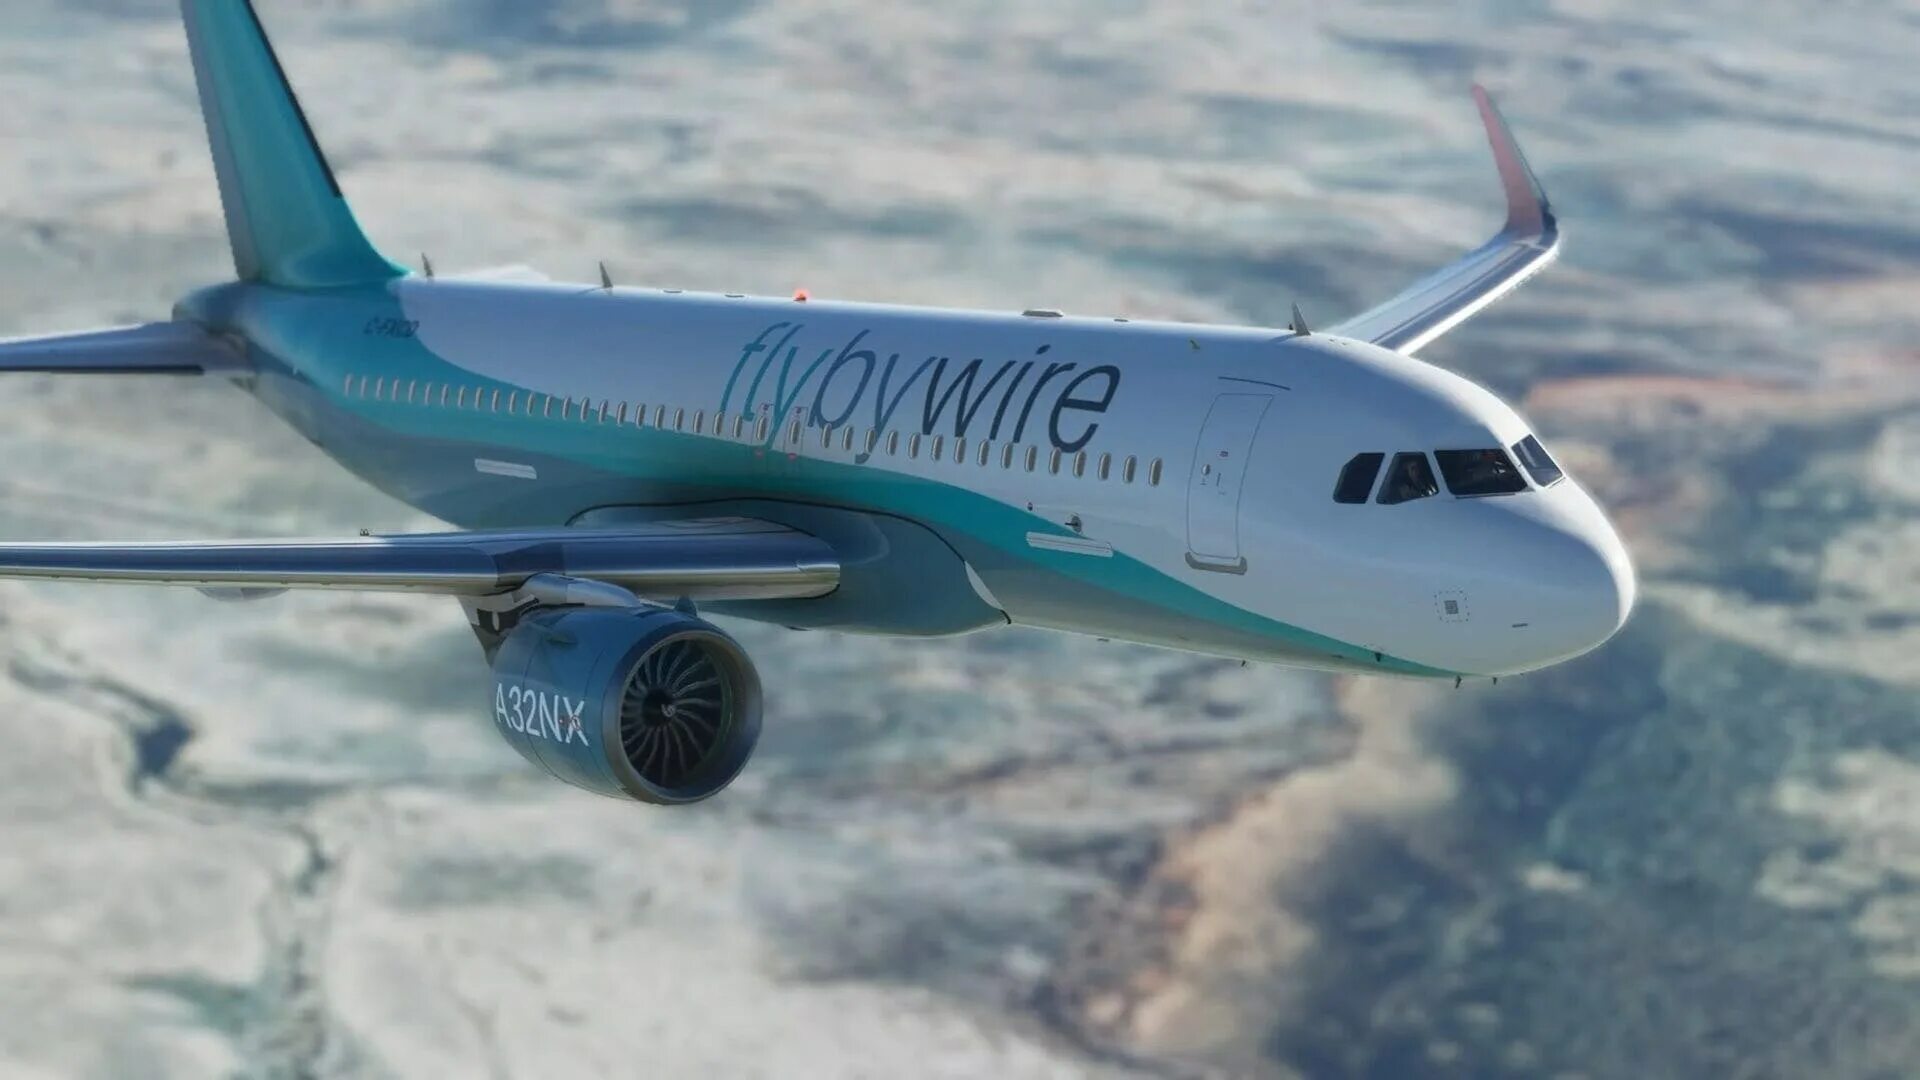 Flybywire a32nx. Airbus a320nx. Fly by wire a320msfs. Flight Factor a320 Uzbekistan Airways.